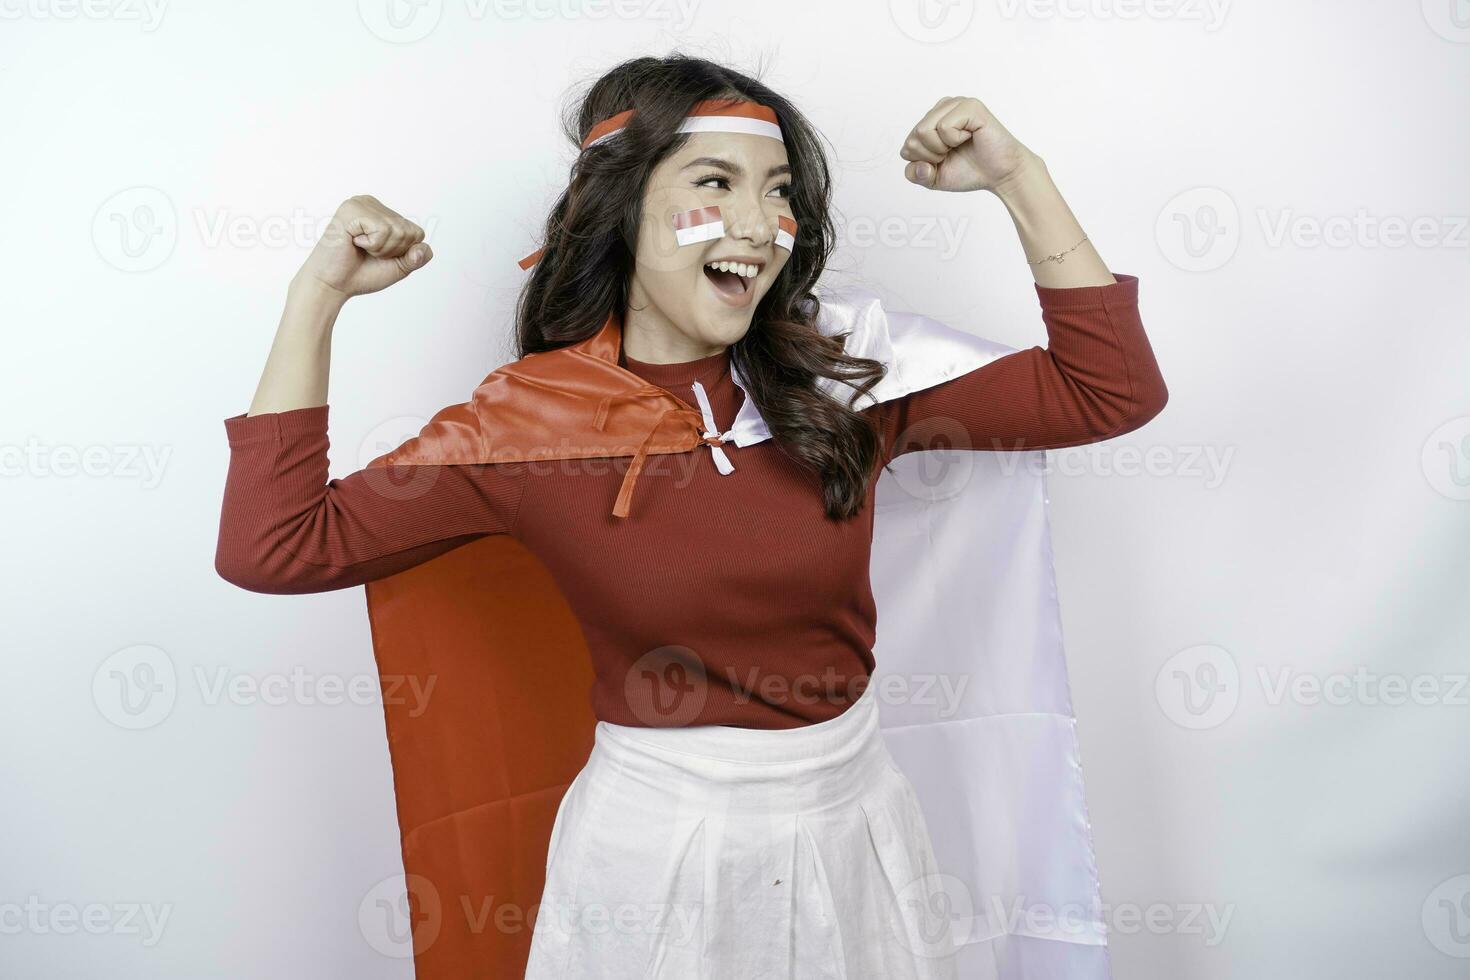 Excited Asian woman wearing a red top, flag cape and headband, showing strong gesture by lifting her arms and muscles smiling proudly. Indonesia's independence day concept. photo